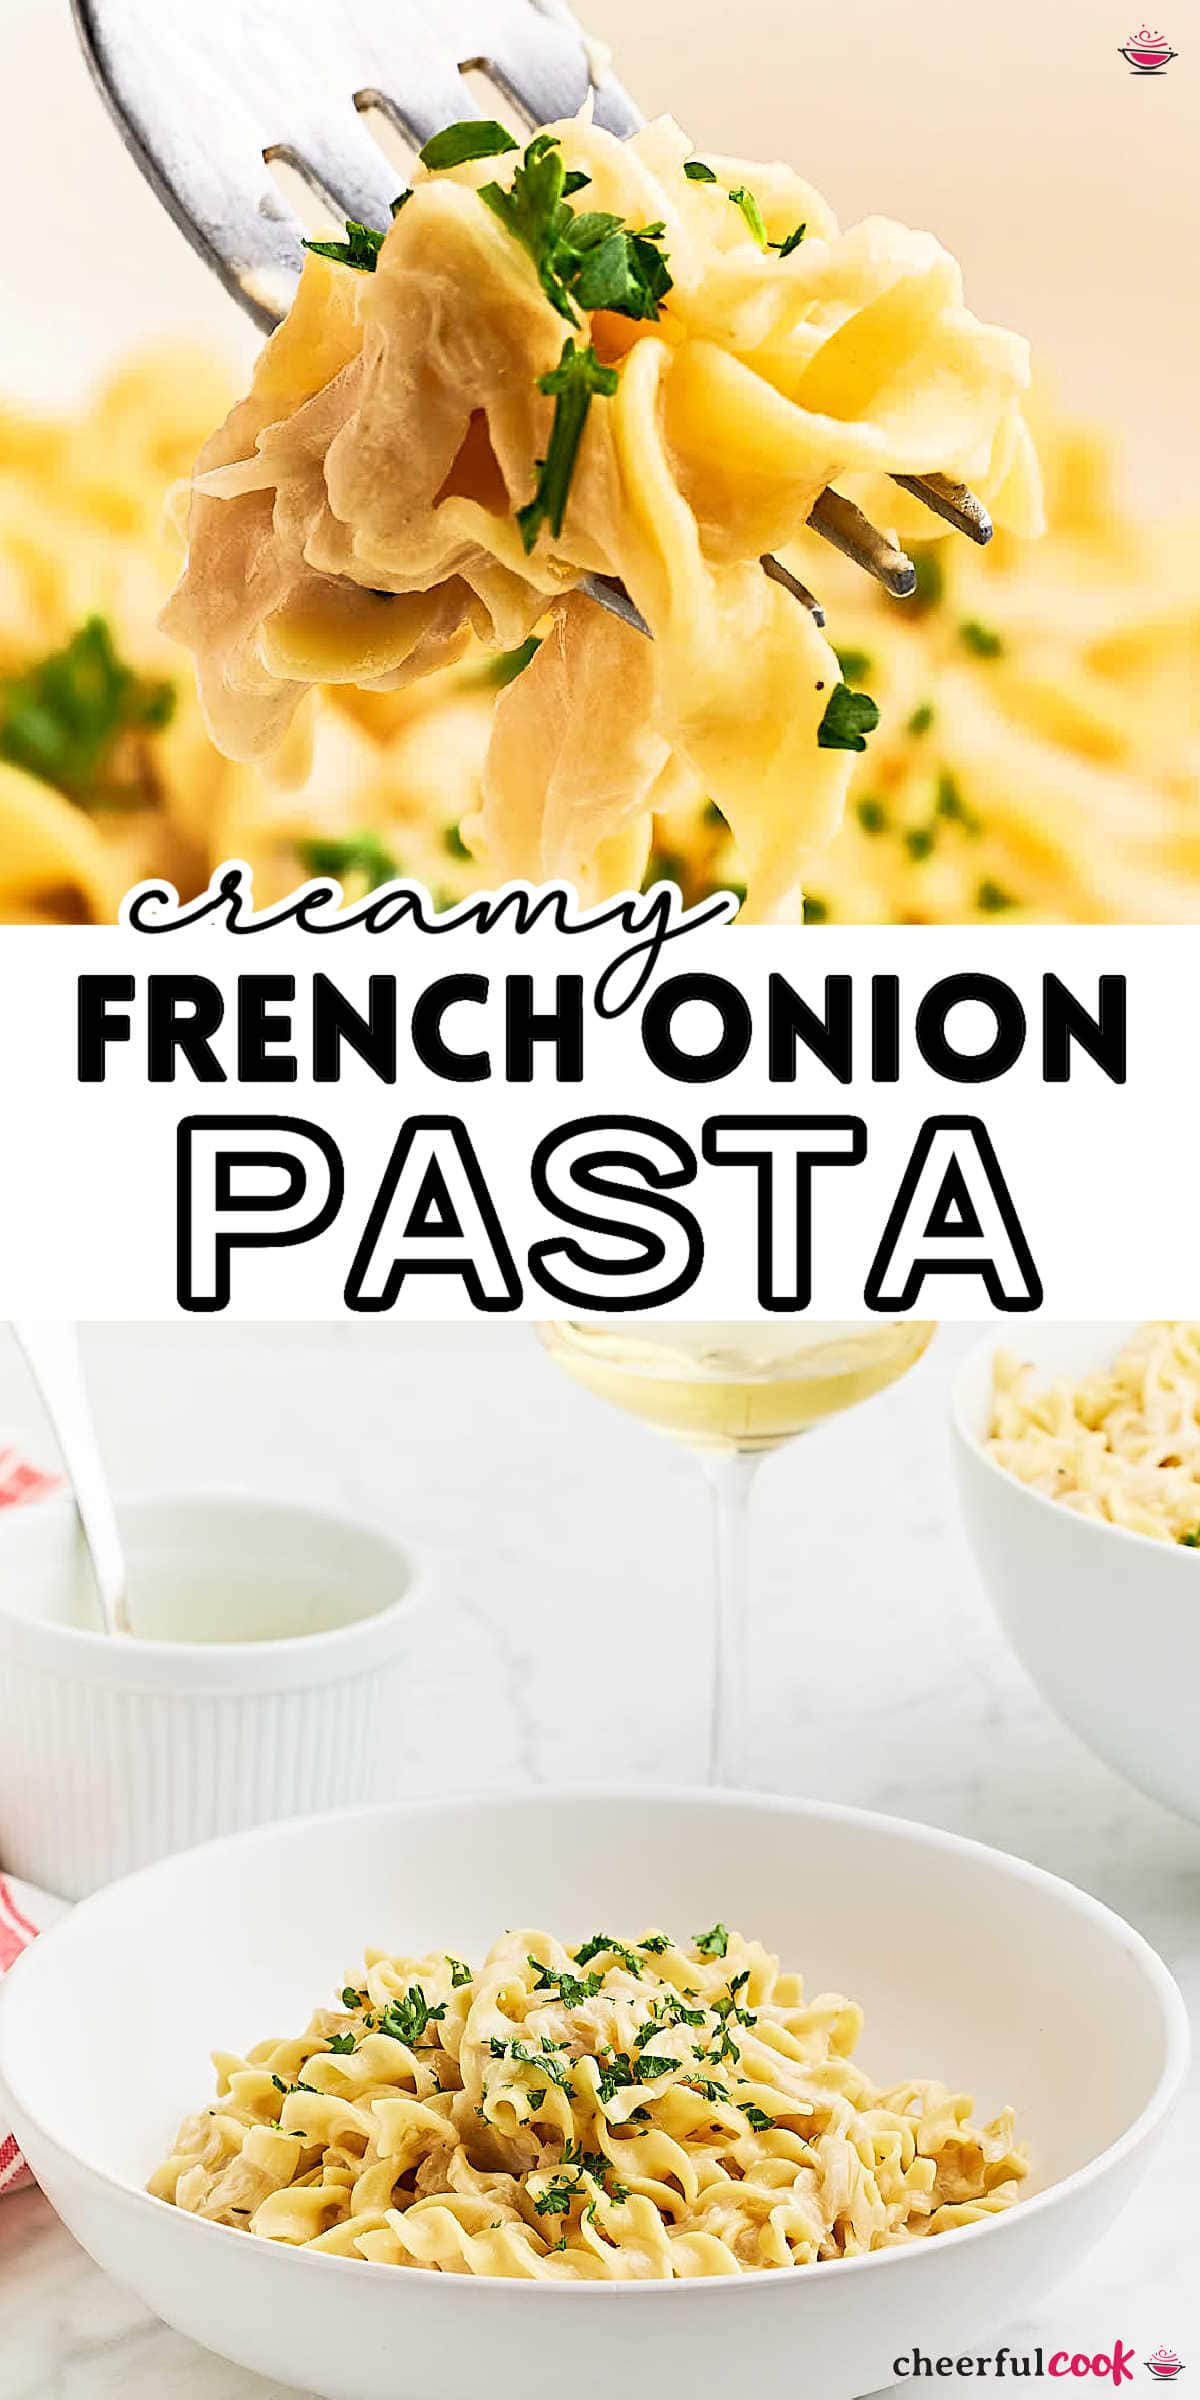 Bring a twist to your pasta night with this French Onion Pasta. It's a one-pot wonder that combines the savory delight of French onion soup with the comfort of pasta. #cheerfulcook #frenchonionpasta #pastadinner #comfortfood #easydinner #onepotmeal via @cheerfulcook